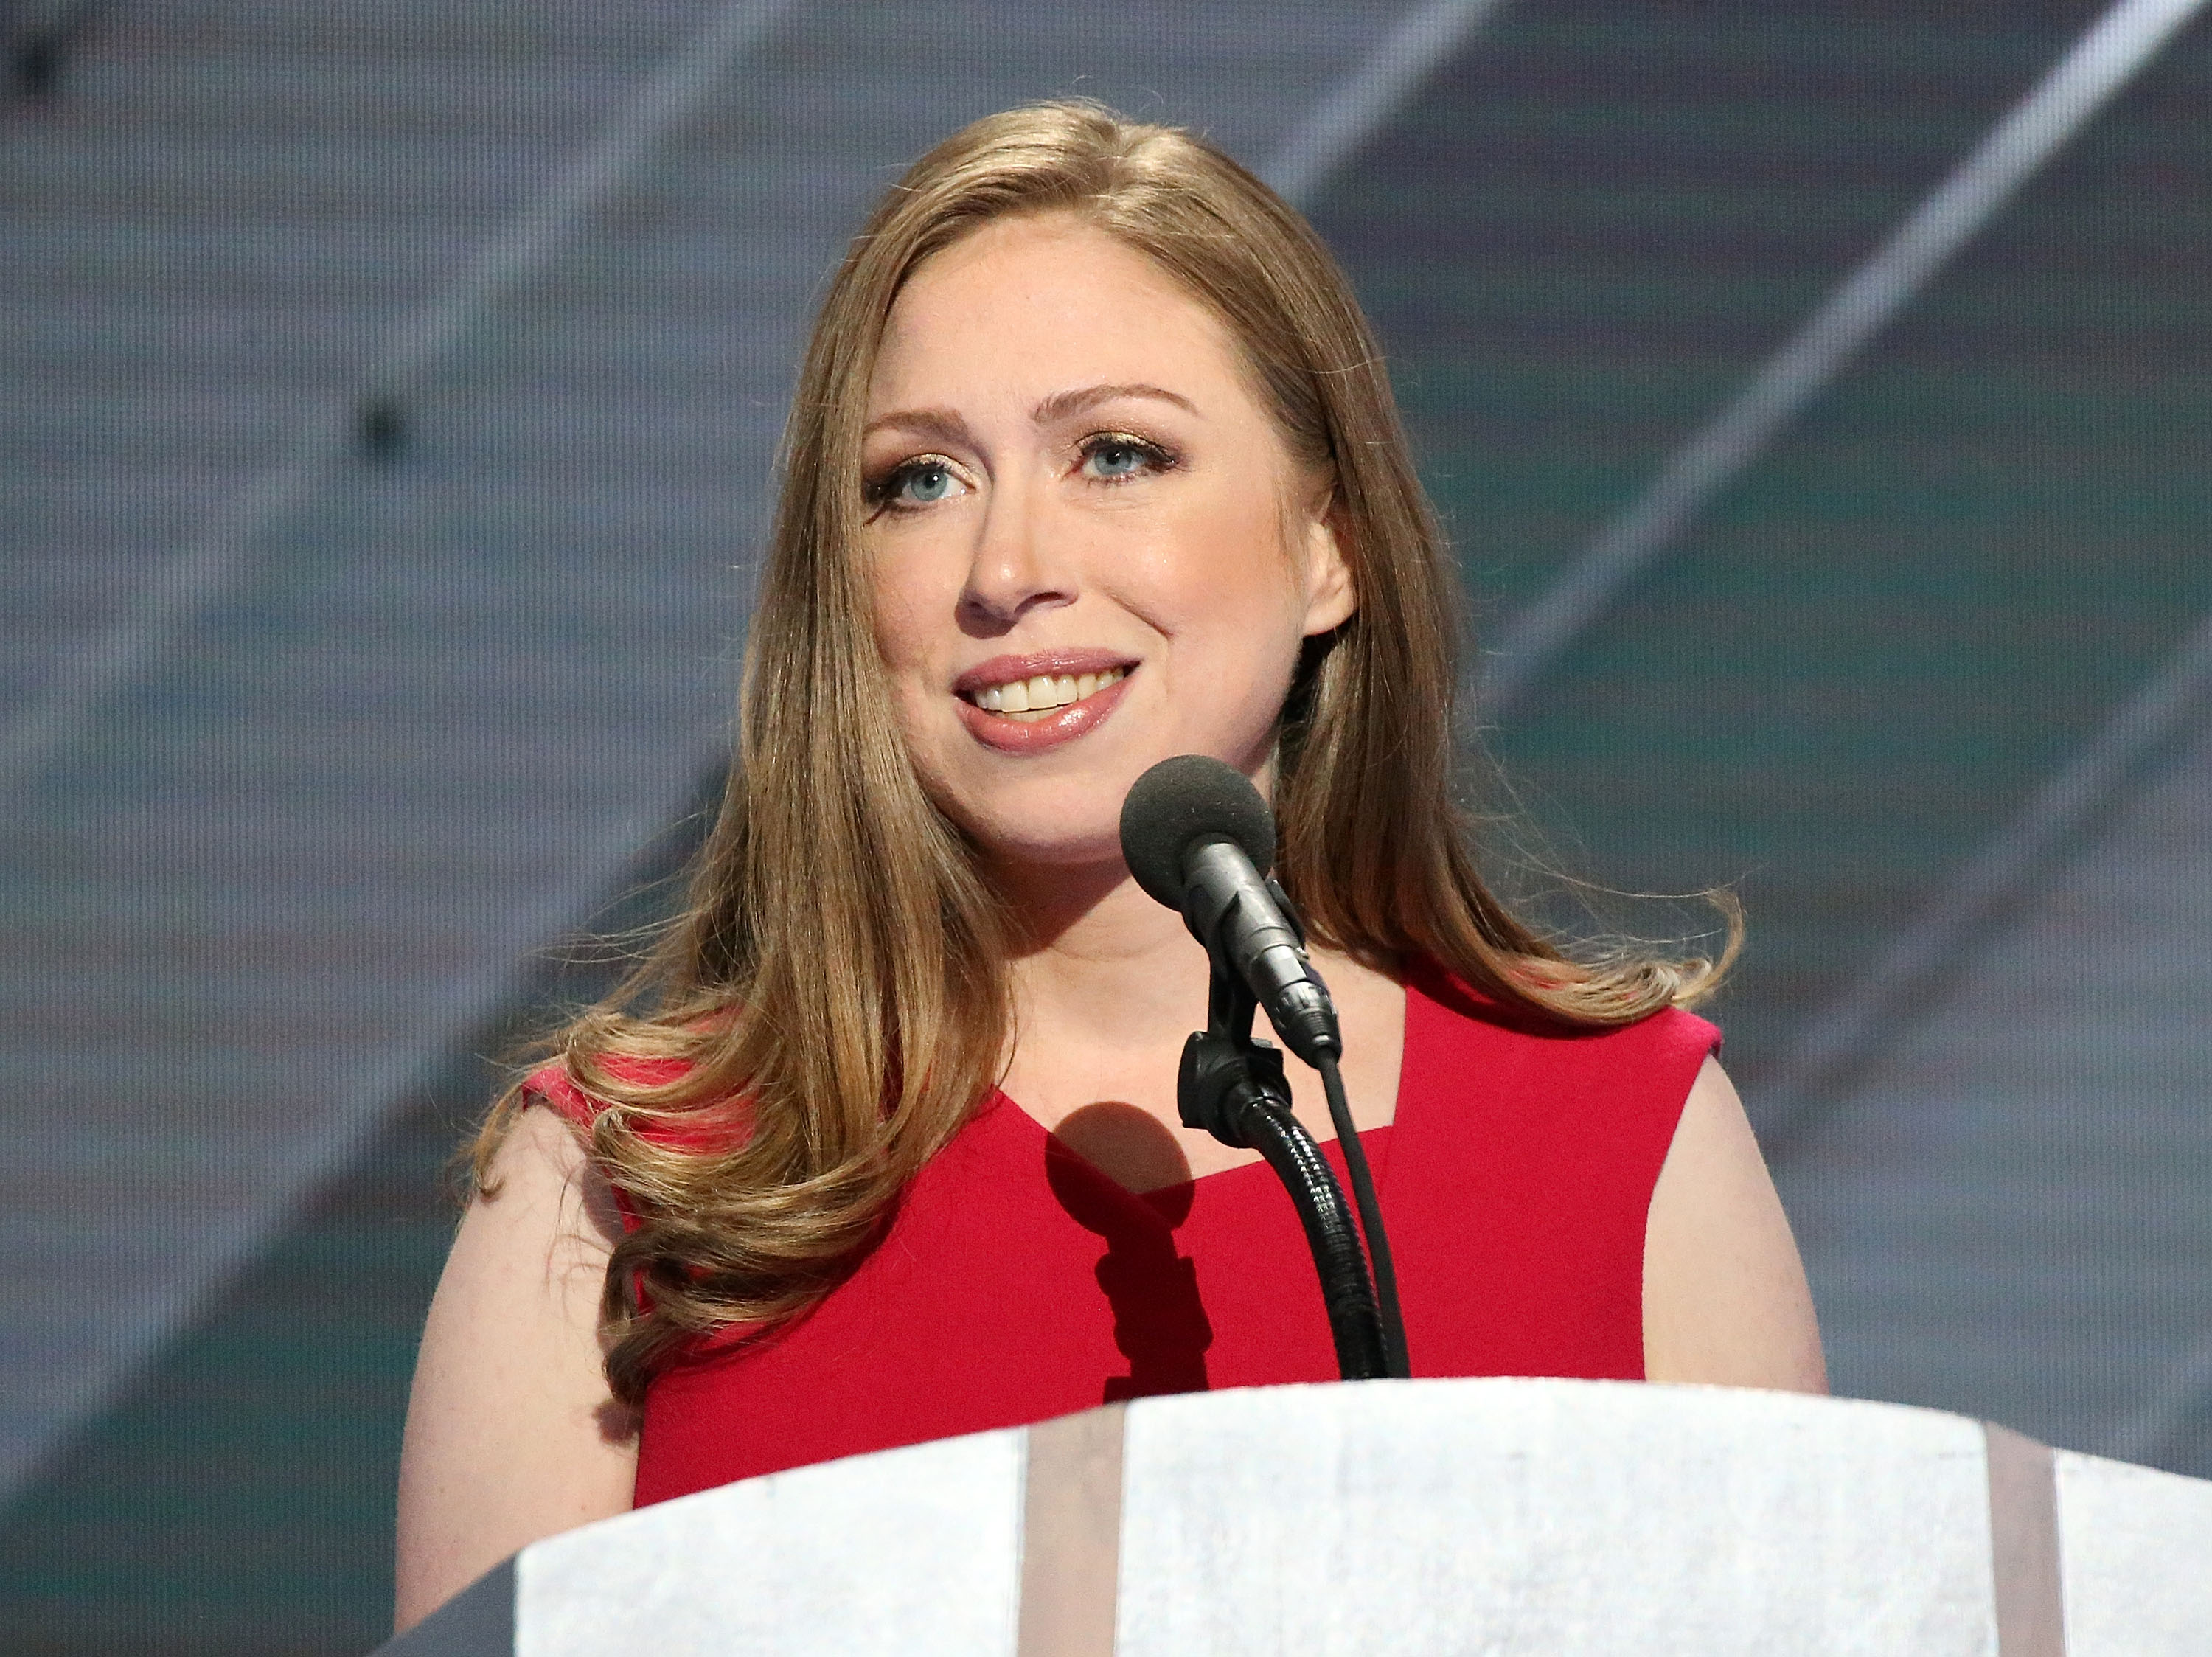 Chelsea Clinton delivers remarks on the fourth day of the Democratic National Convention on July 28, 2016 in Philadelphia, Pennsylvania. (Paul Morigi—WireImage/Getty Images)